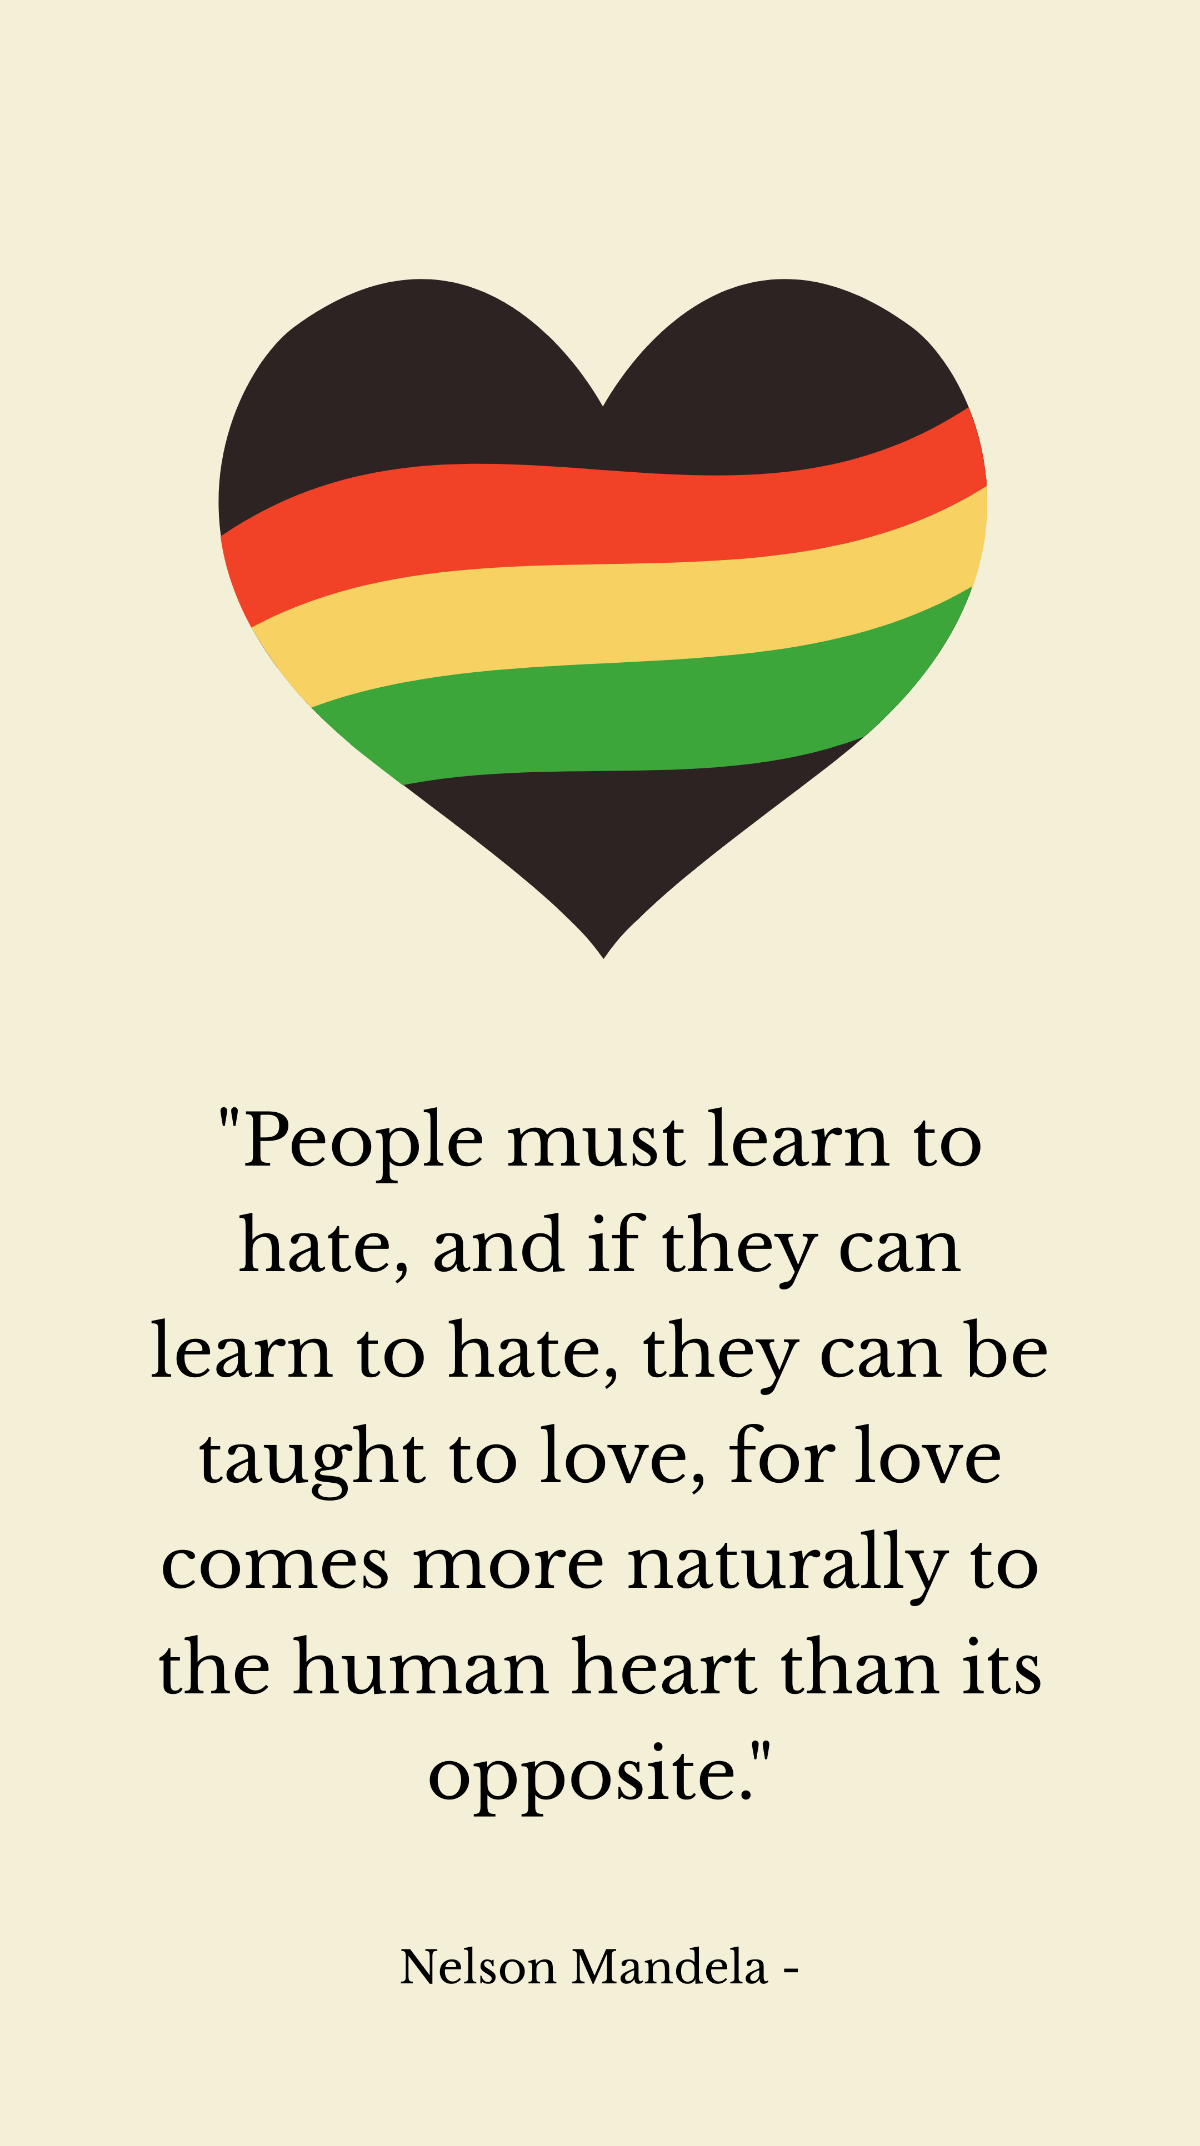 Nelson Mandela - People must learn to hate, and if they can learn to hate, they can be taught to love, for love comes more naturally to the human heart than its opposite.